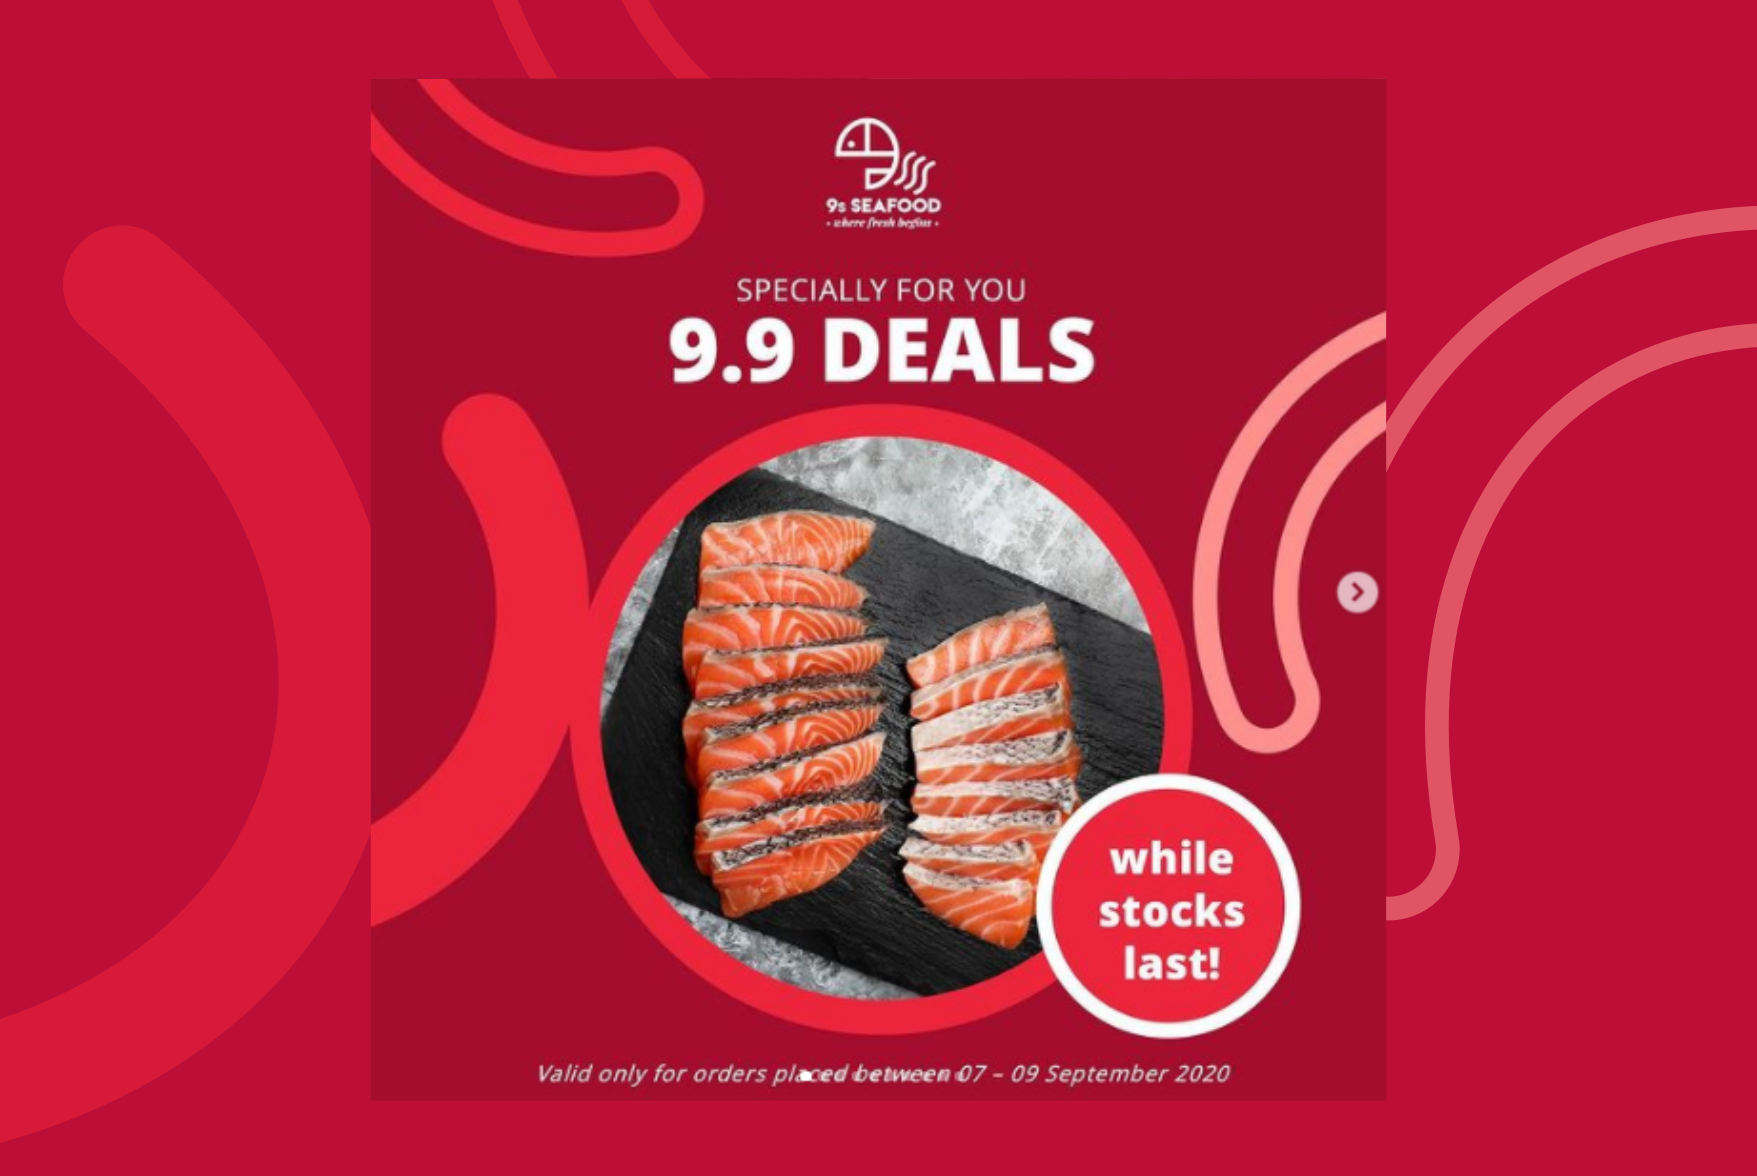 A digital ad for a promotion in 2020 with the 9s Seafood logo displayed at the top